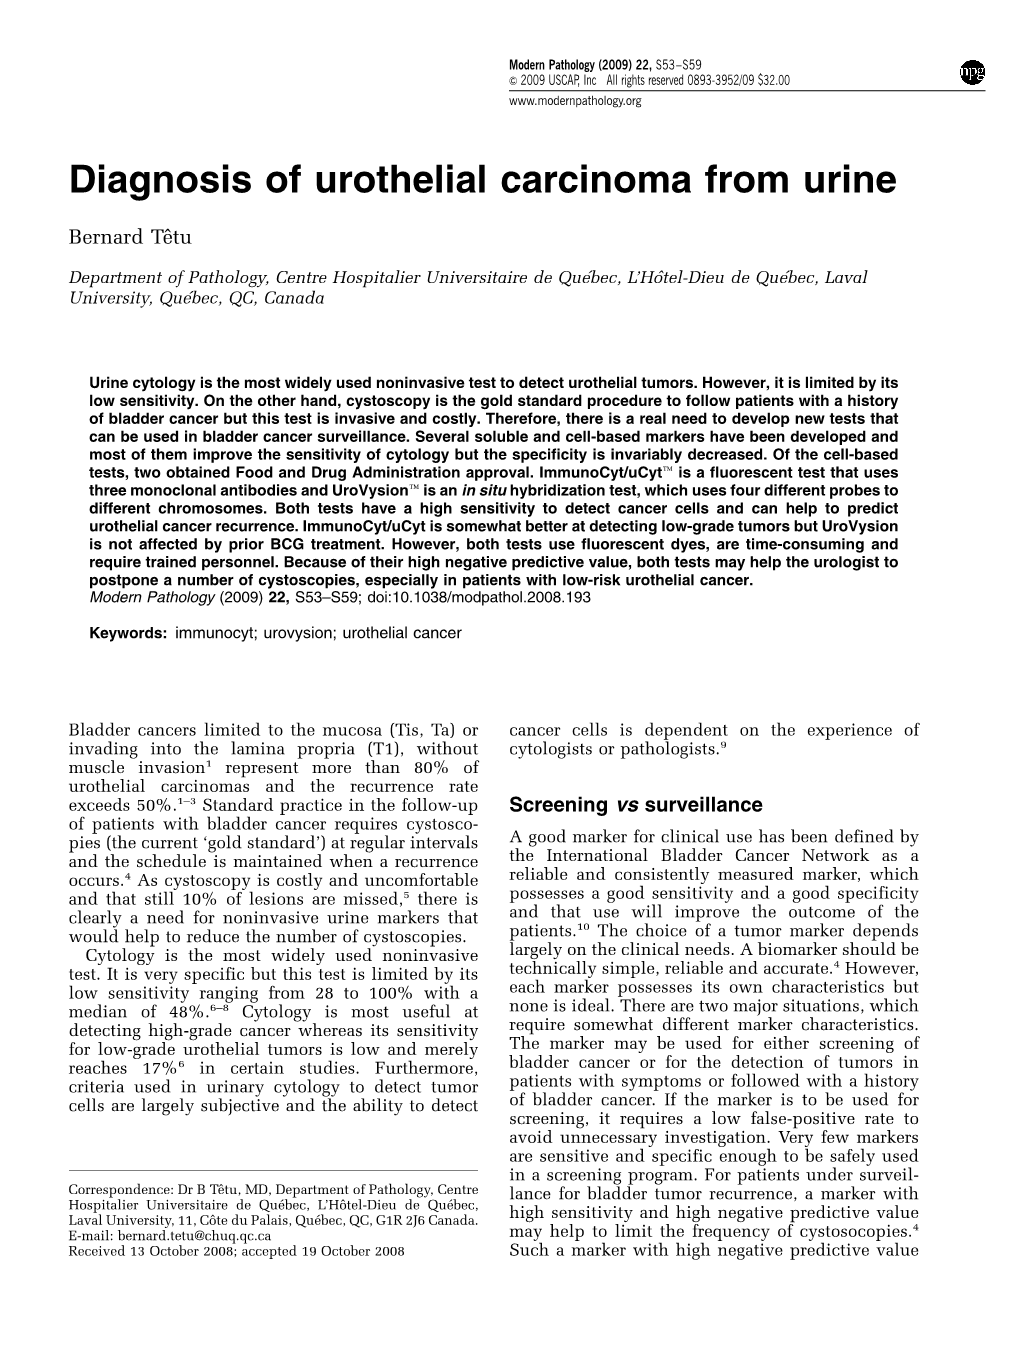 Diagnosis of Urothelial Carcinoma from Urine